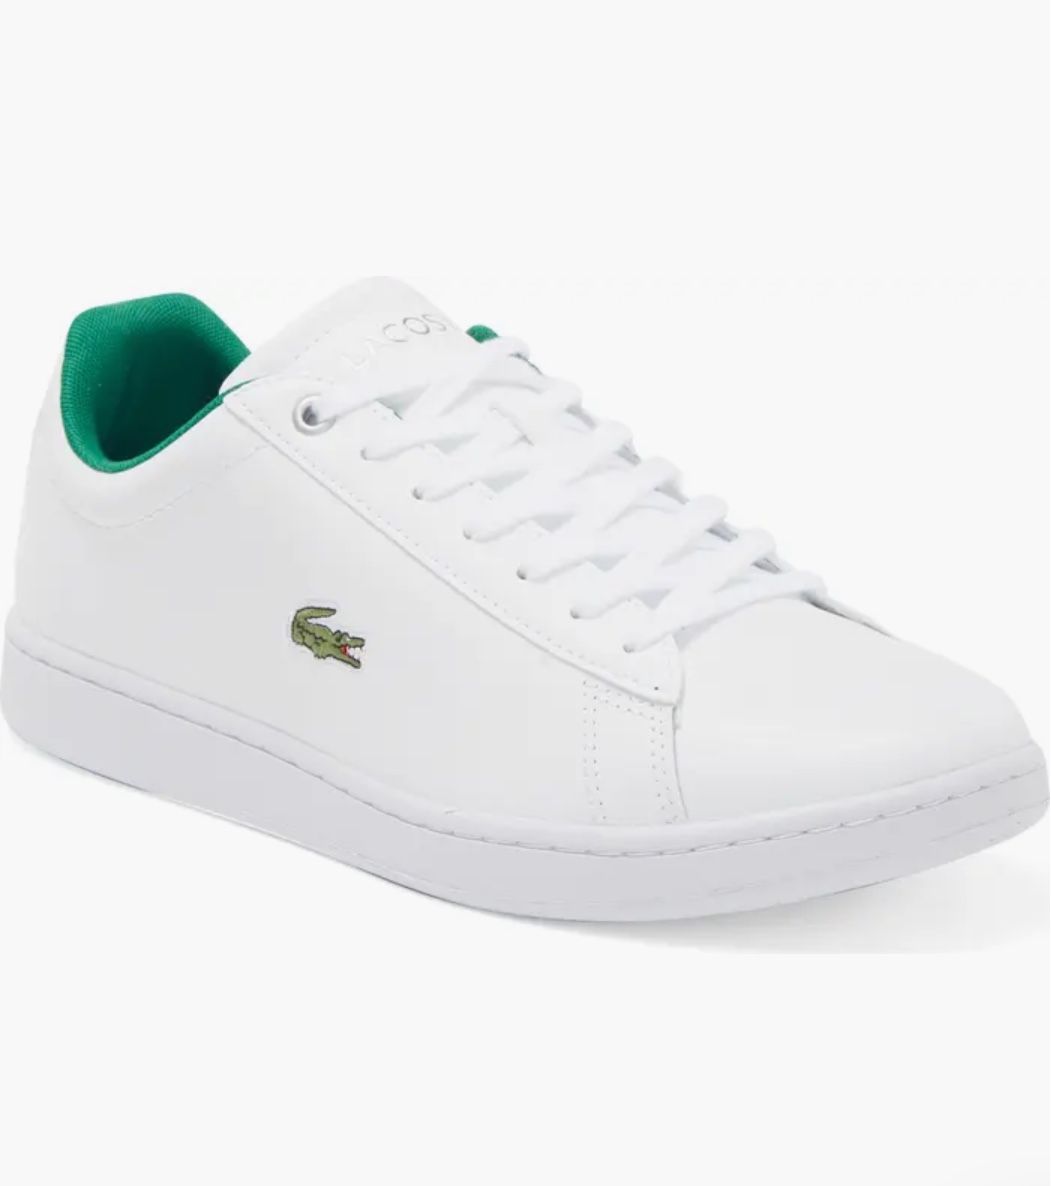 Lacoste Hydez Ortholite Leather Sneaker Size 8 Men’s